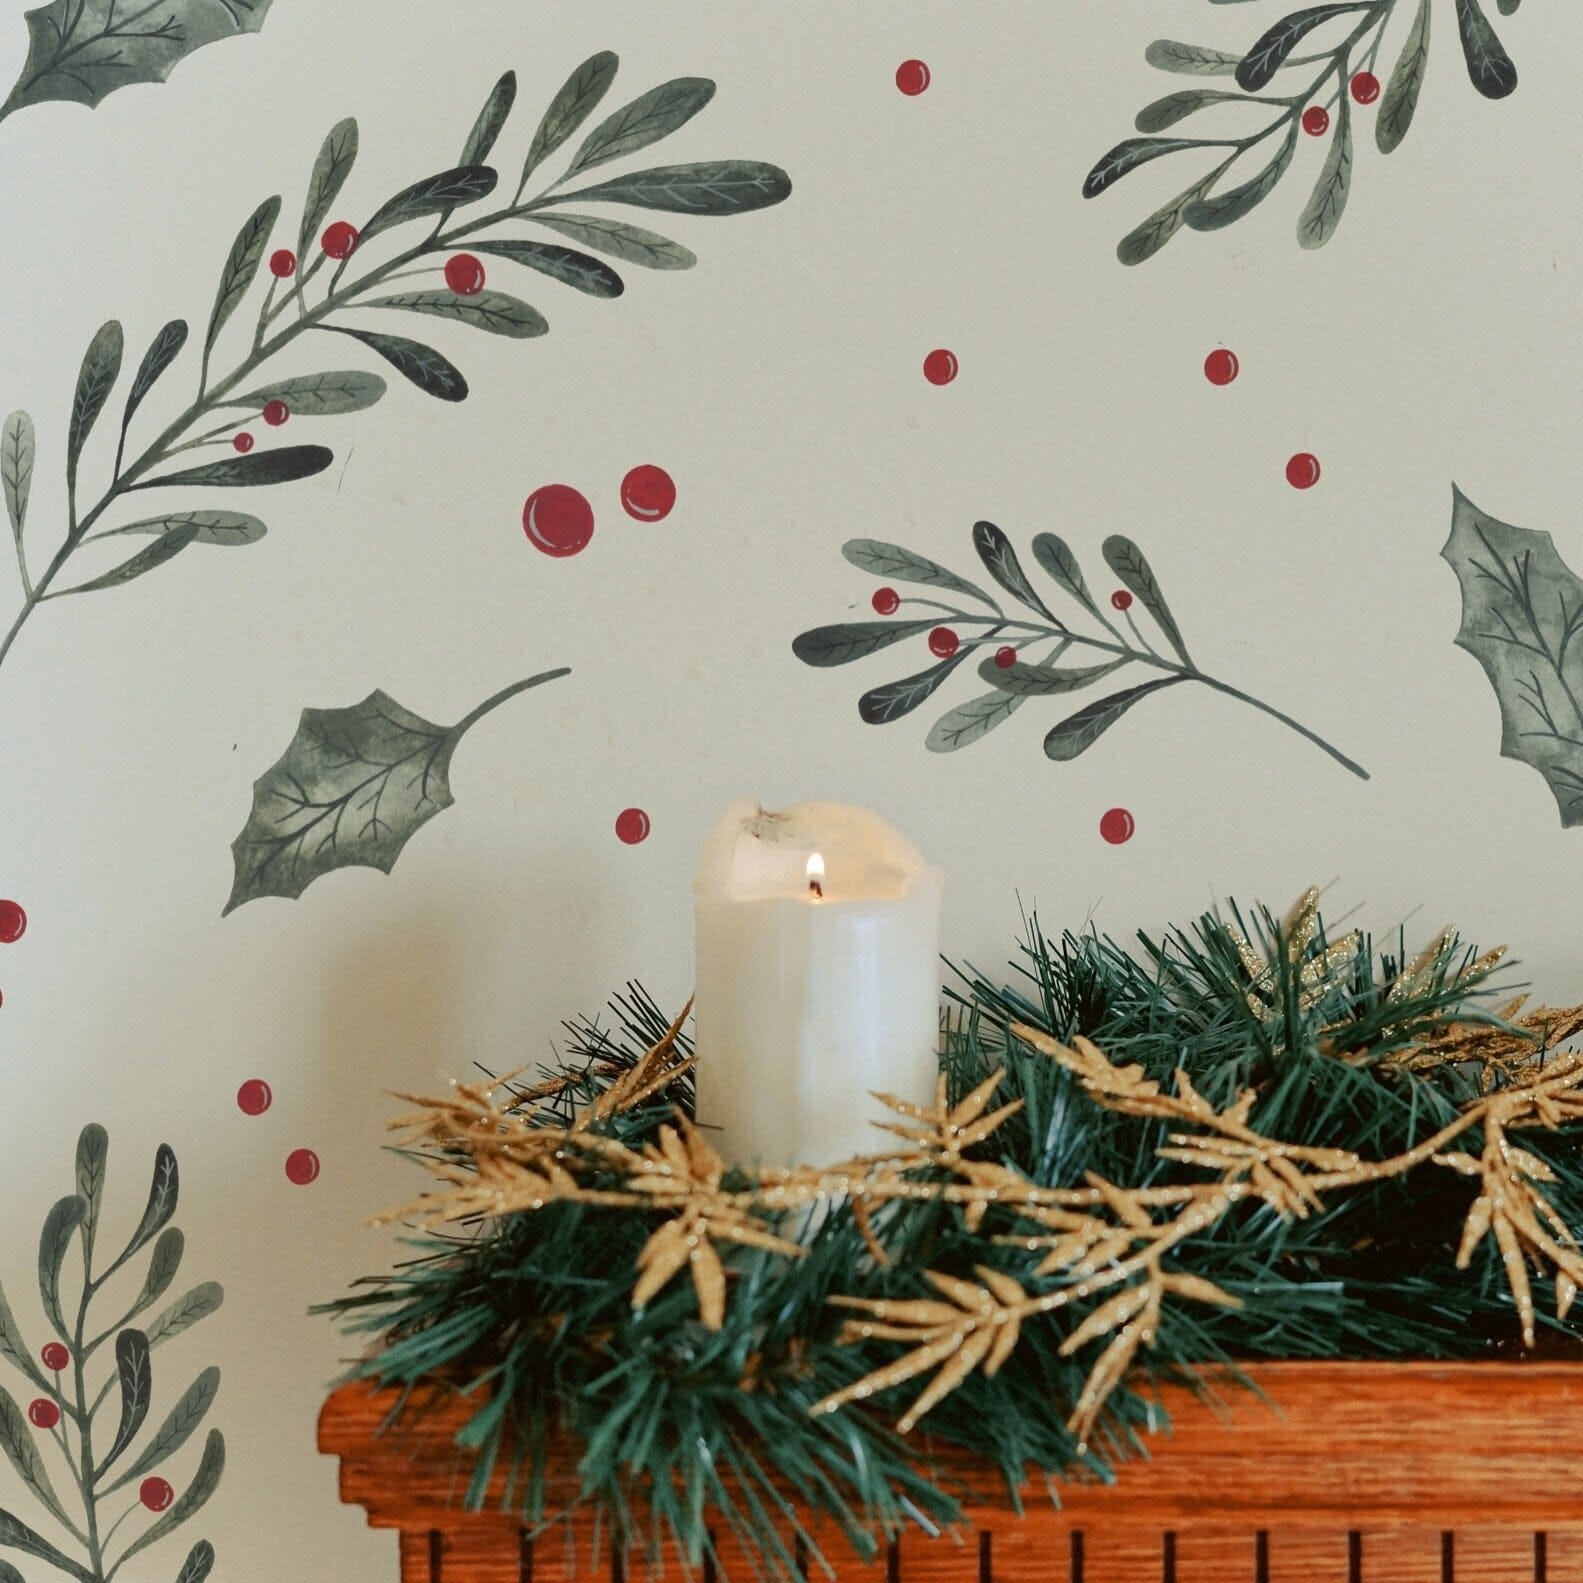 Christmas Holly Wall Decals